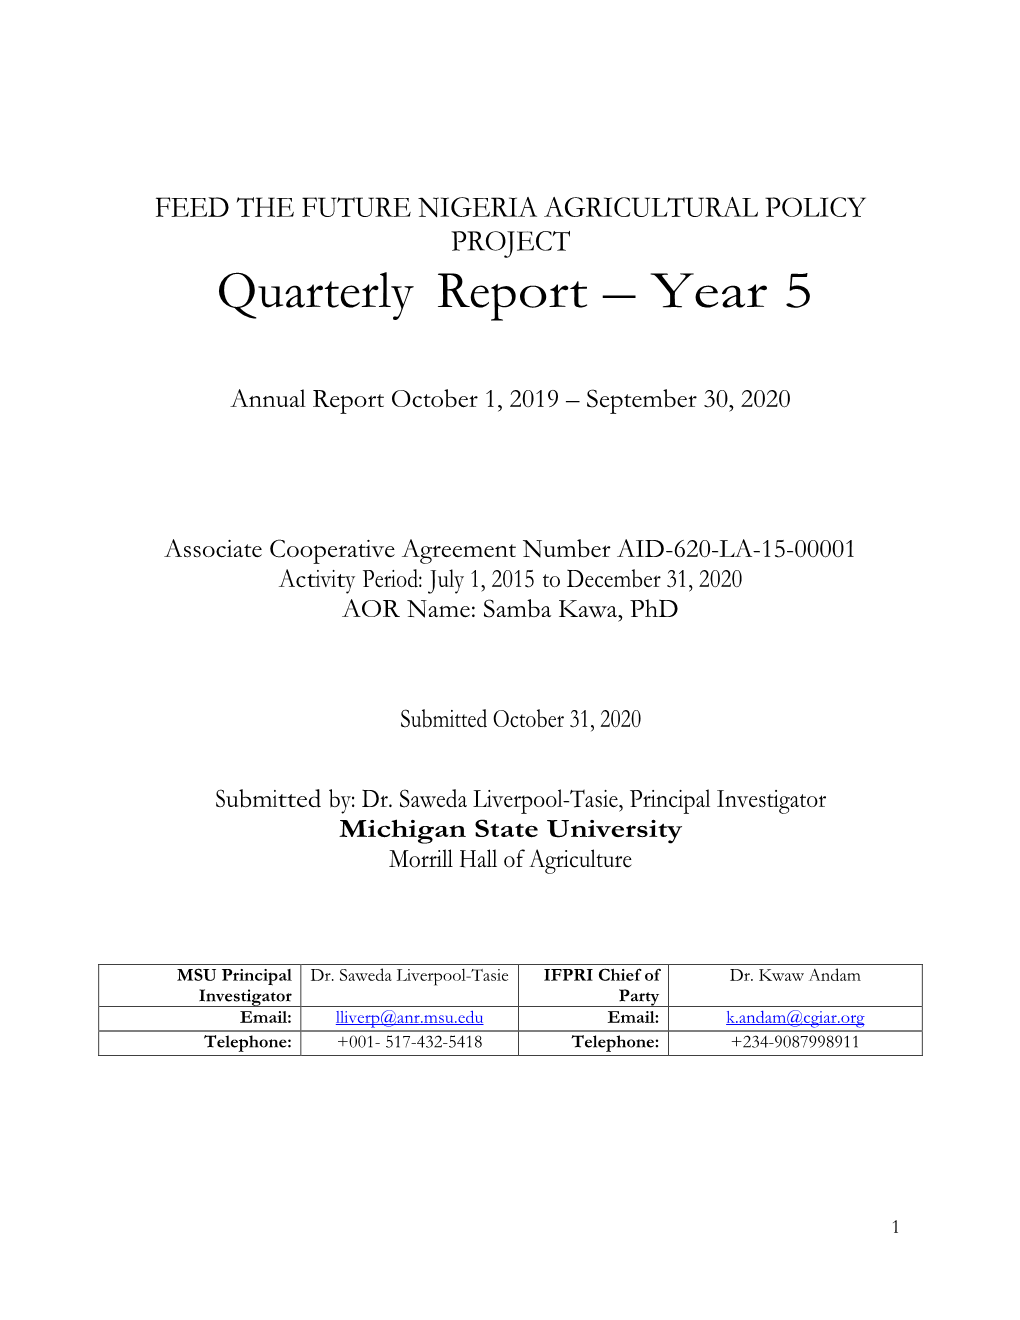 FEED the FUTURE NIGERIA AGRICULTURAL POLICY PROJECT Quarterly Report – Year 5